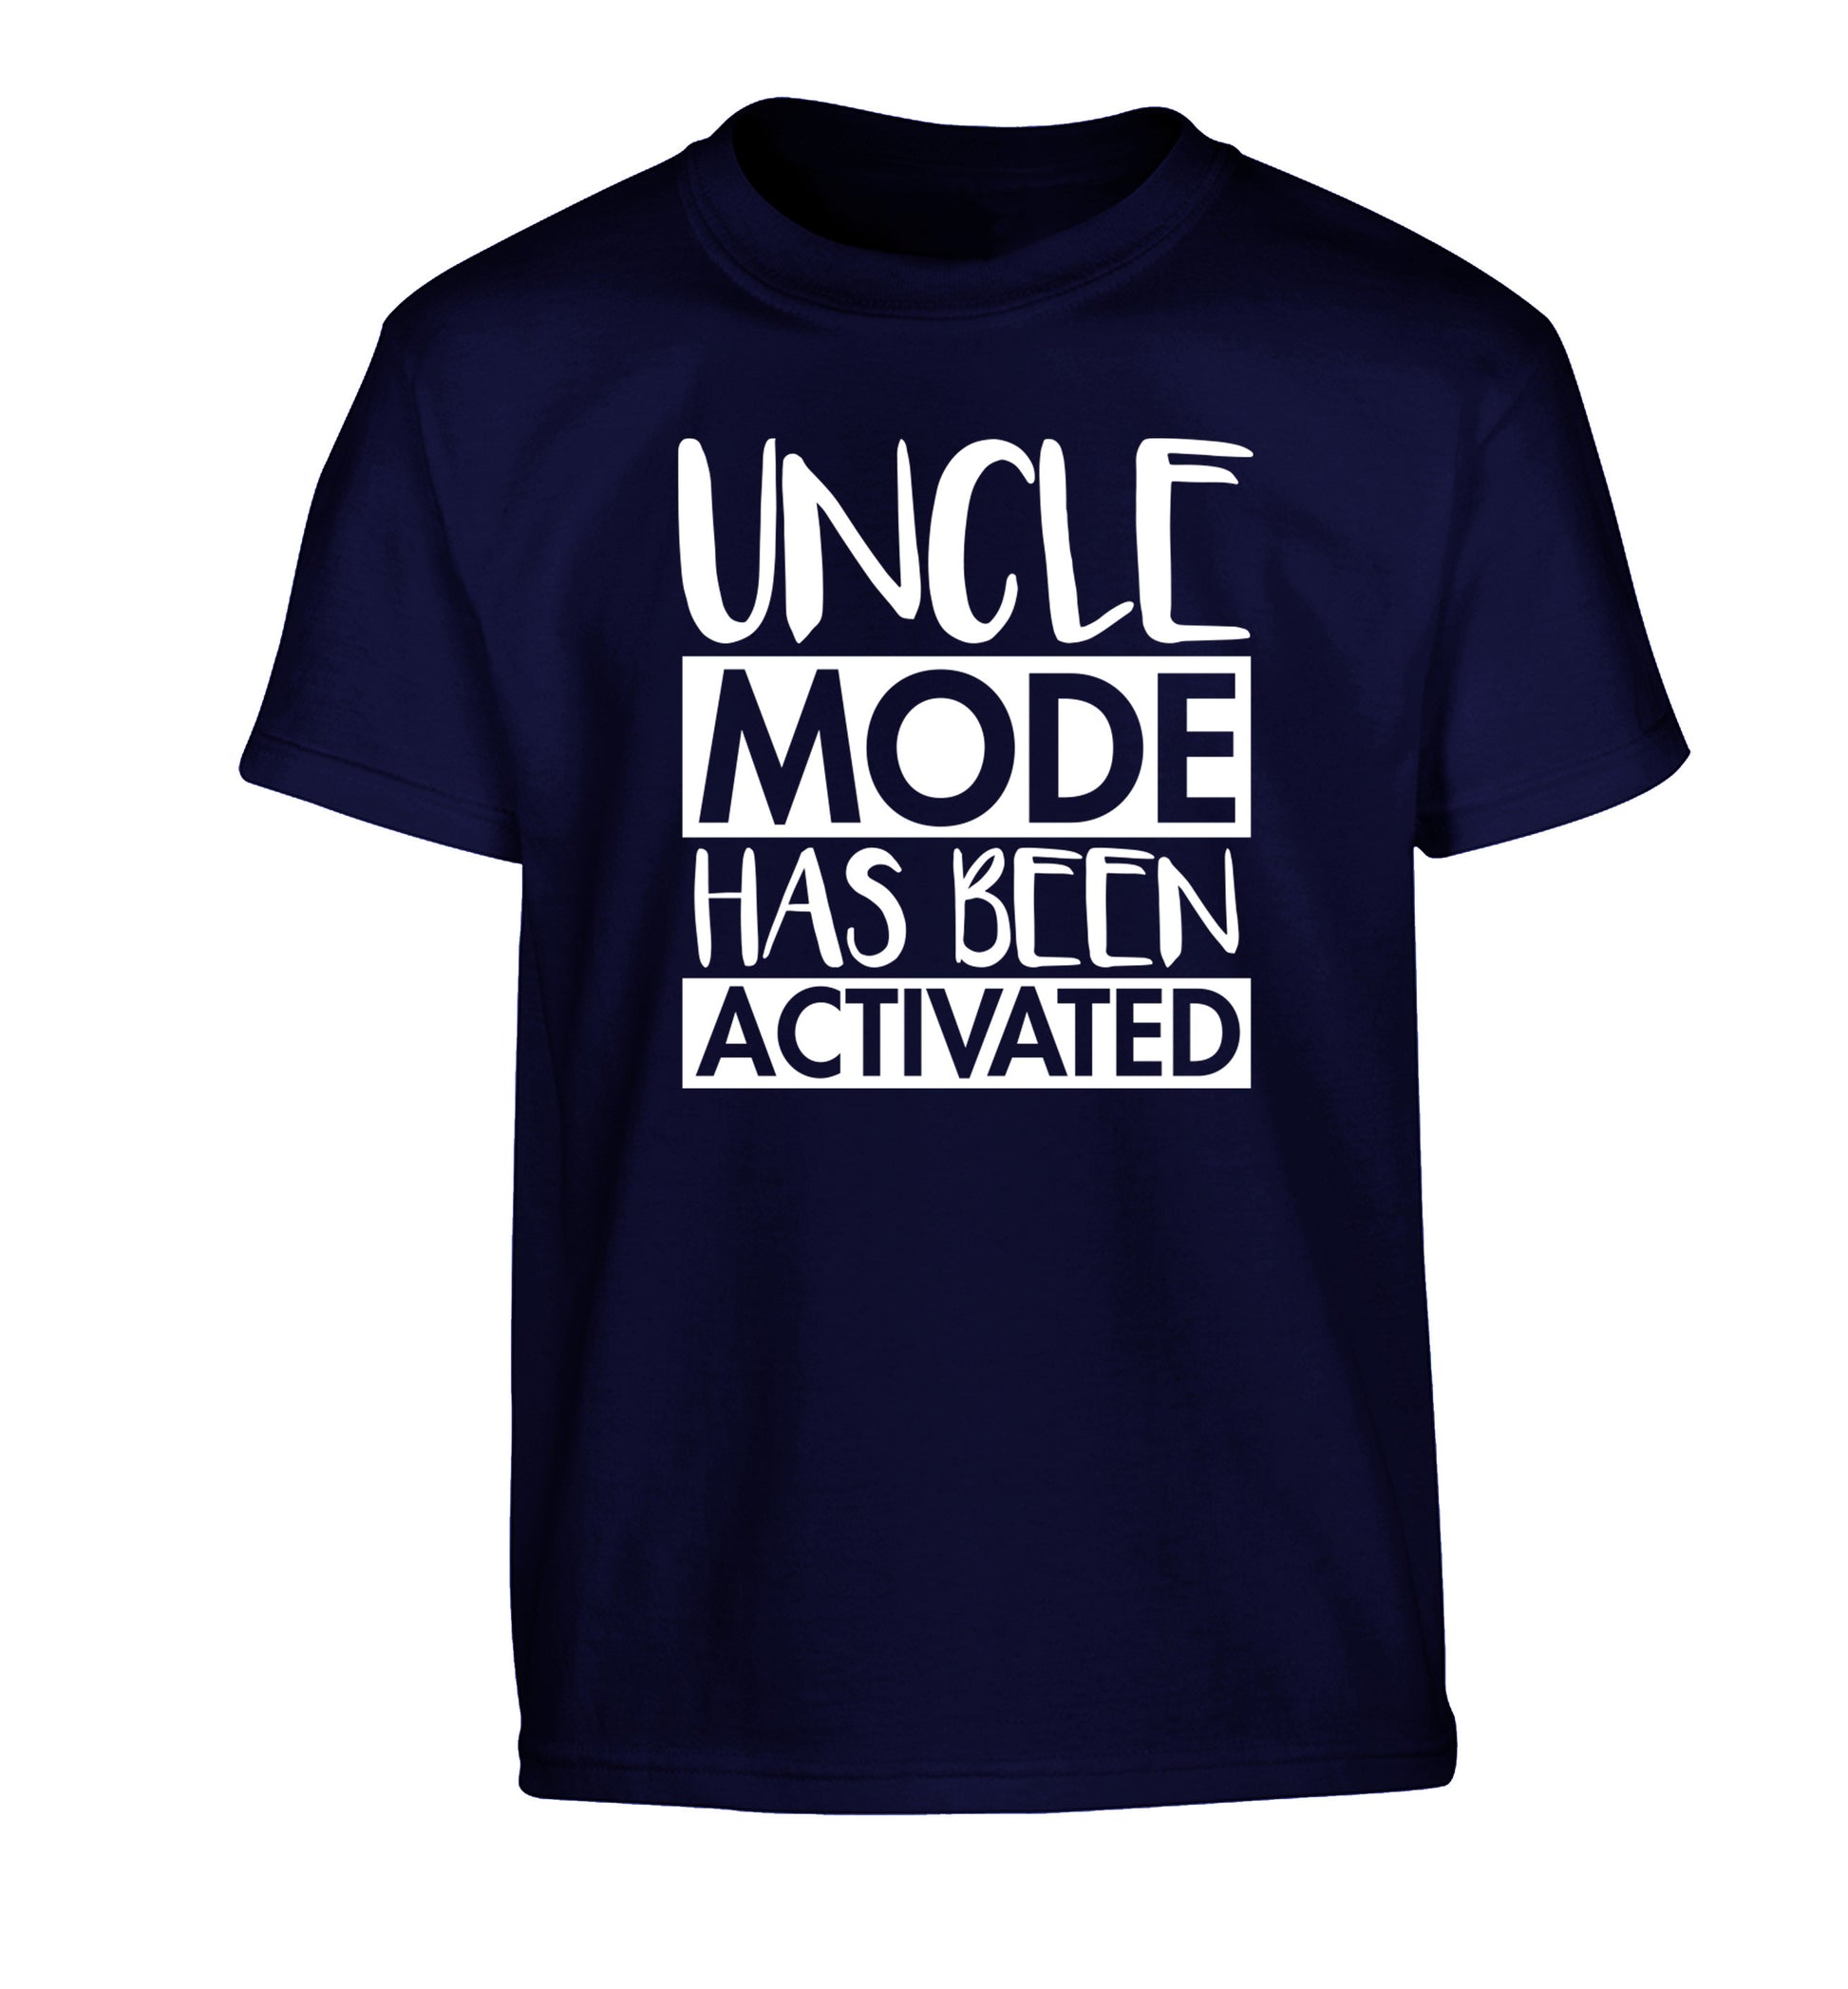 Uncle mode activated Children's navy Tshirt 12-14 Years